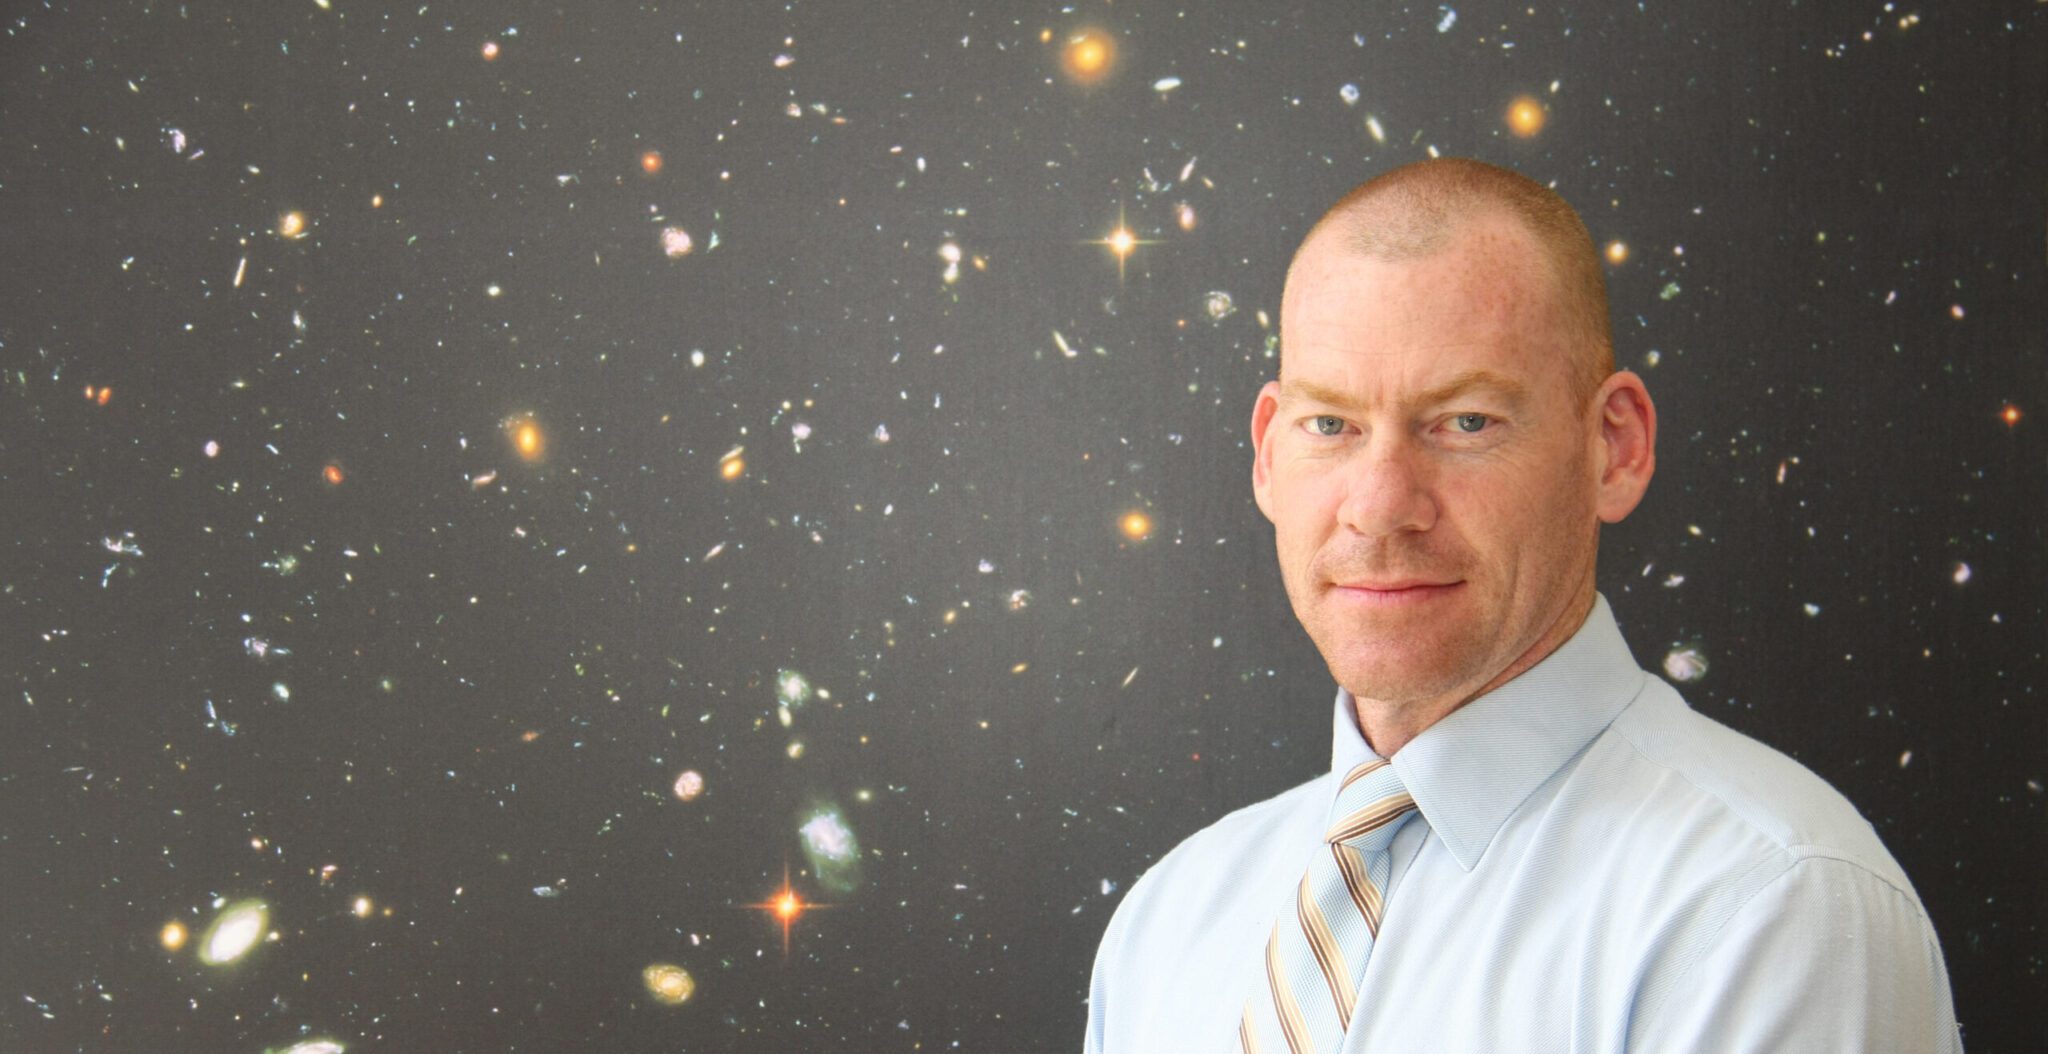 Steven Tingay wears a white shirt and striped tie. He is in front of a poster of the universe.